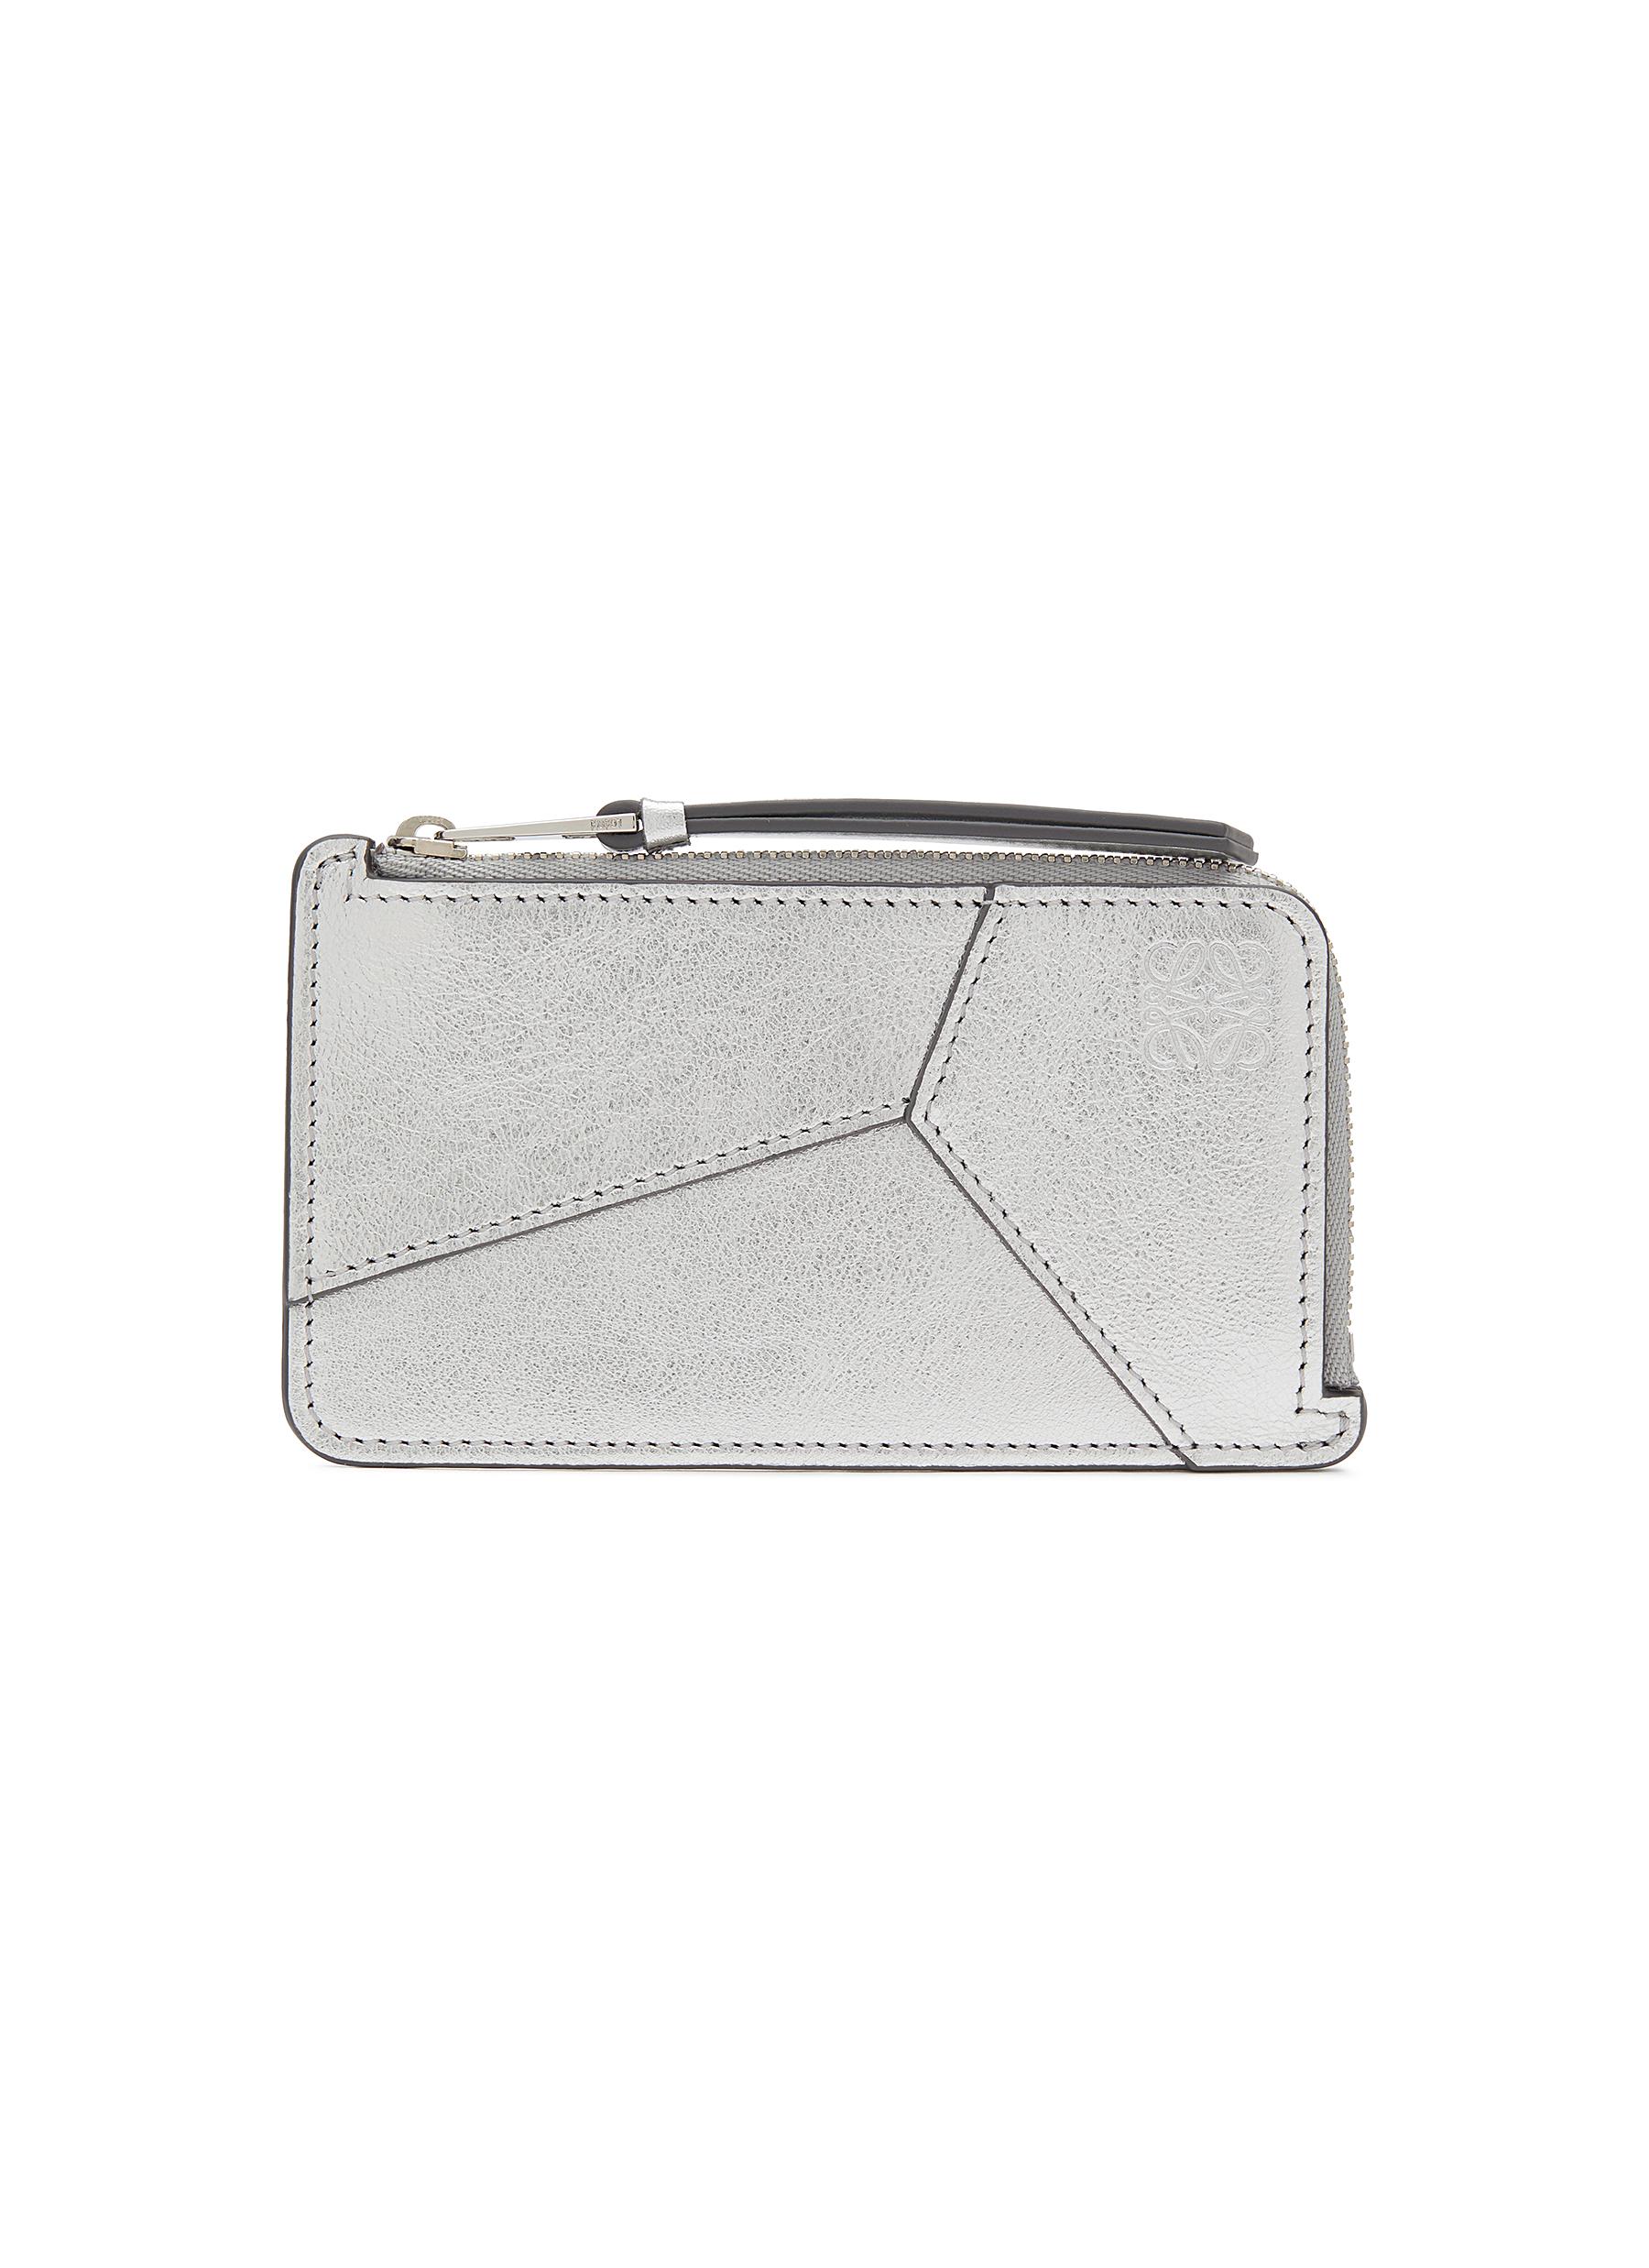 LOEWE | Puzzle Metallic Leather Coin Cardholder | SILVER | Women 